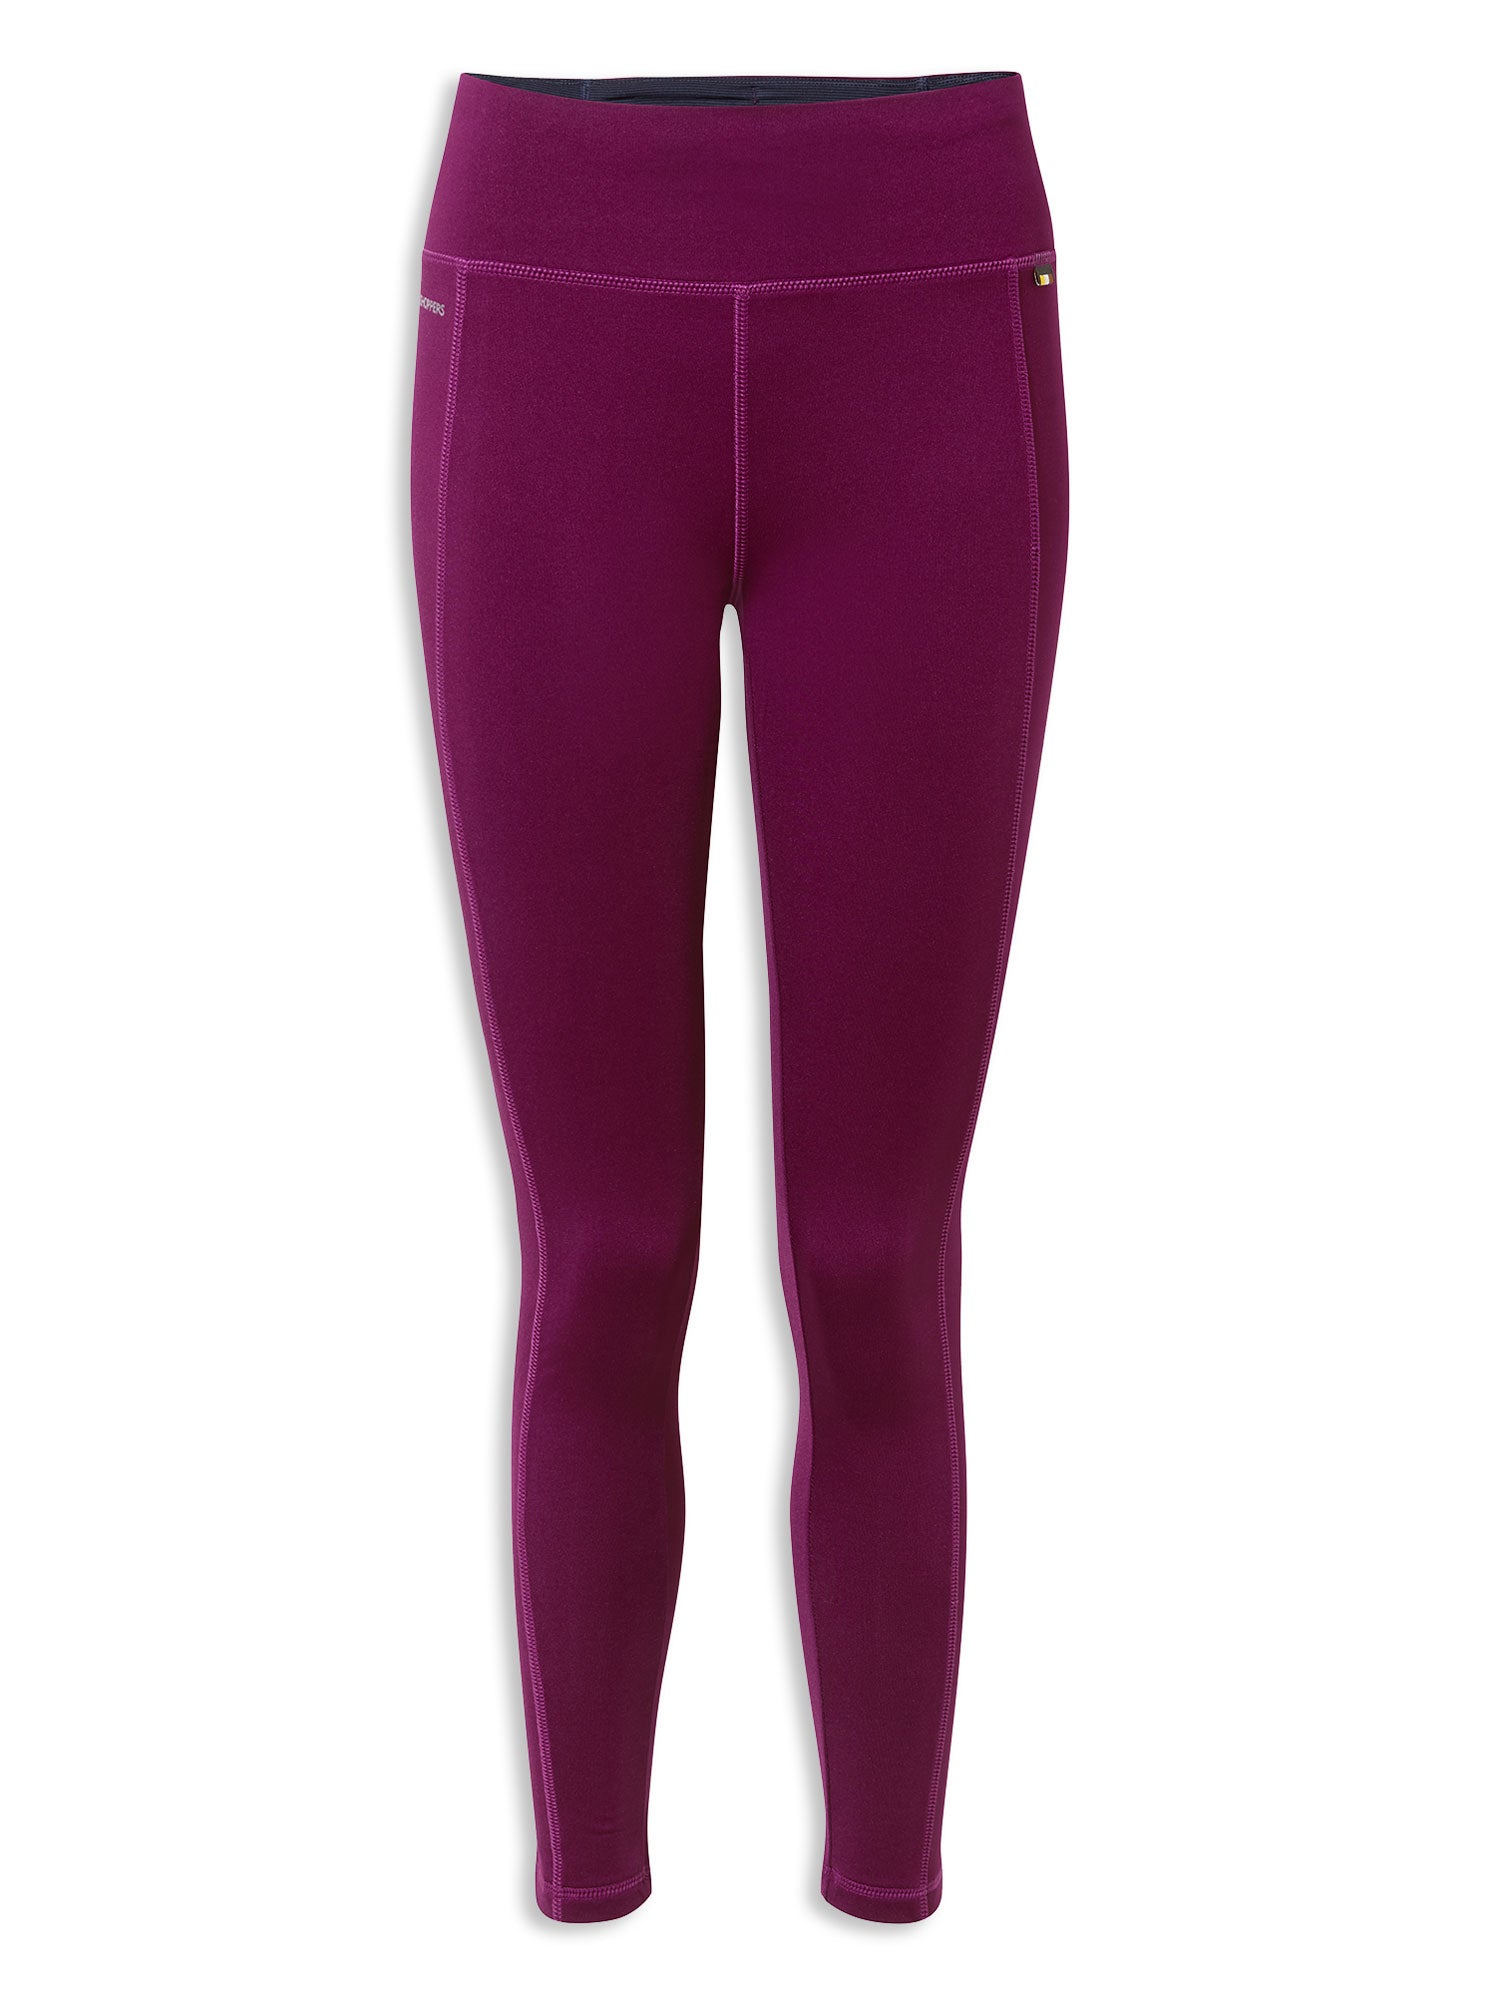 Blackcurrant Craghoppers Velocity Tights